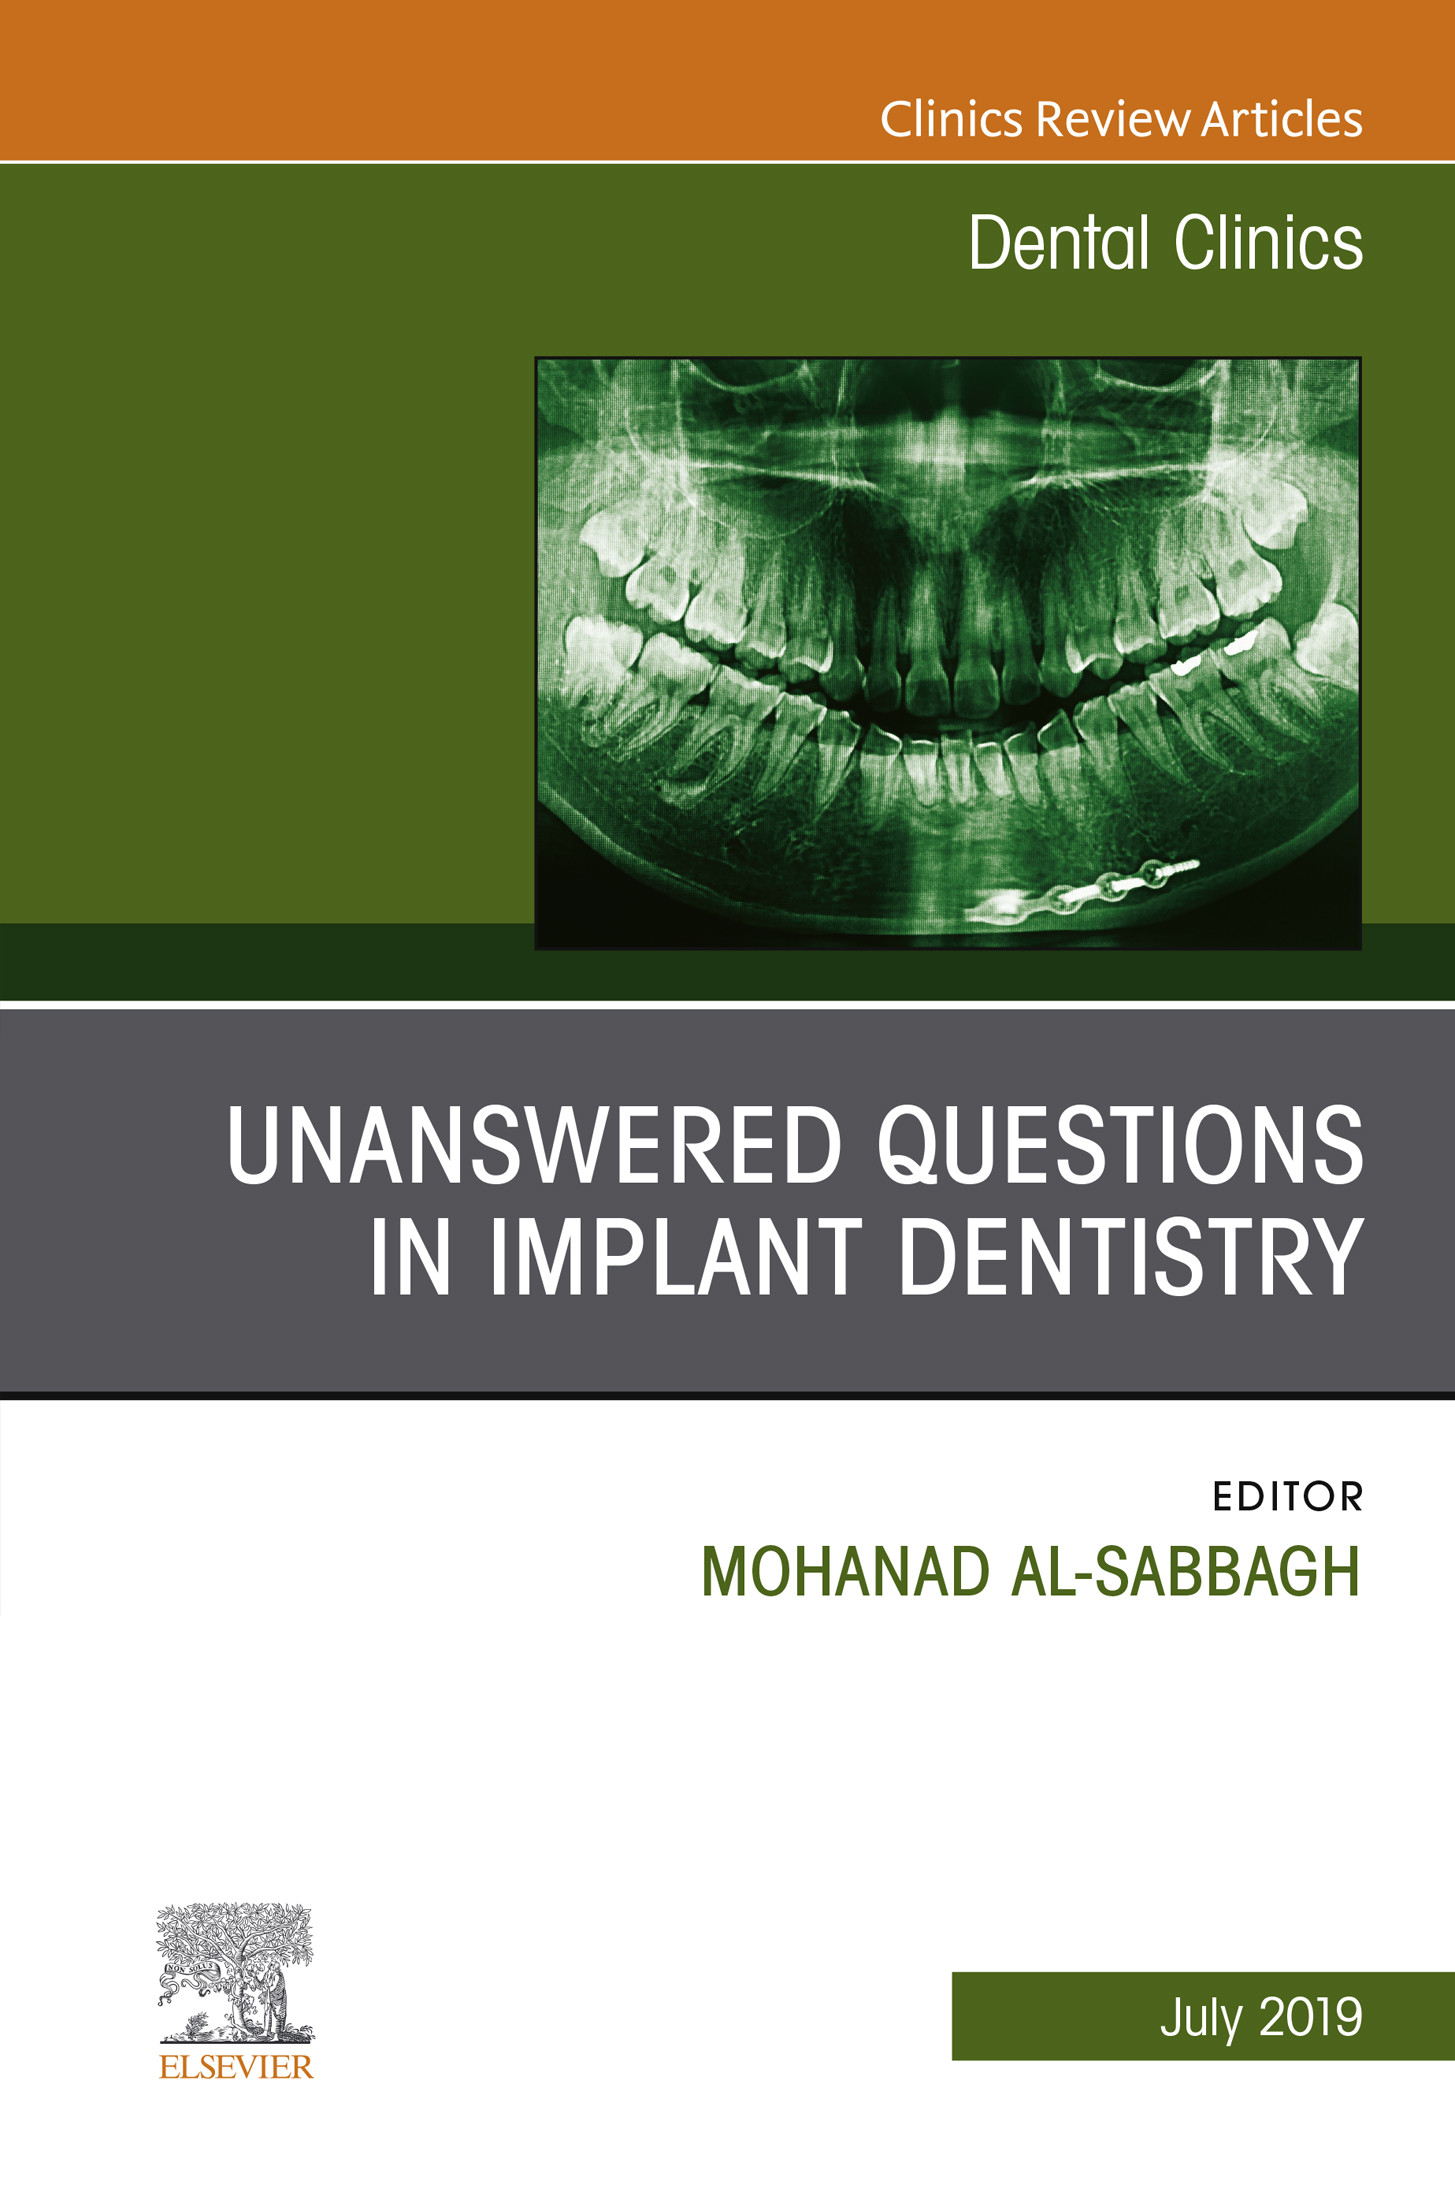 Unanswered Questions in Implant Dentistry, An Issue of Dental Clinics of North America, E-book